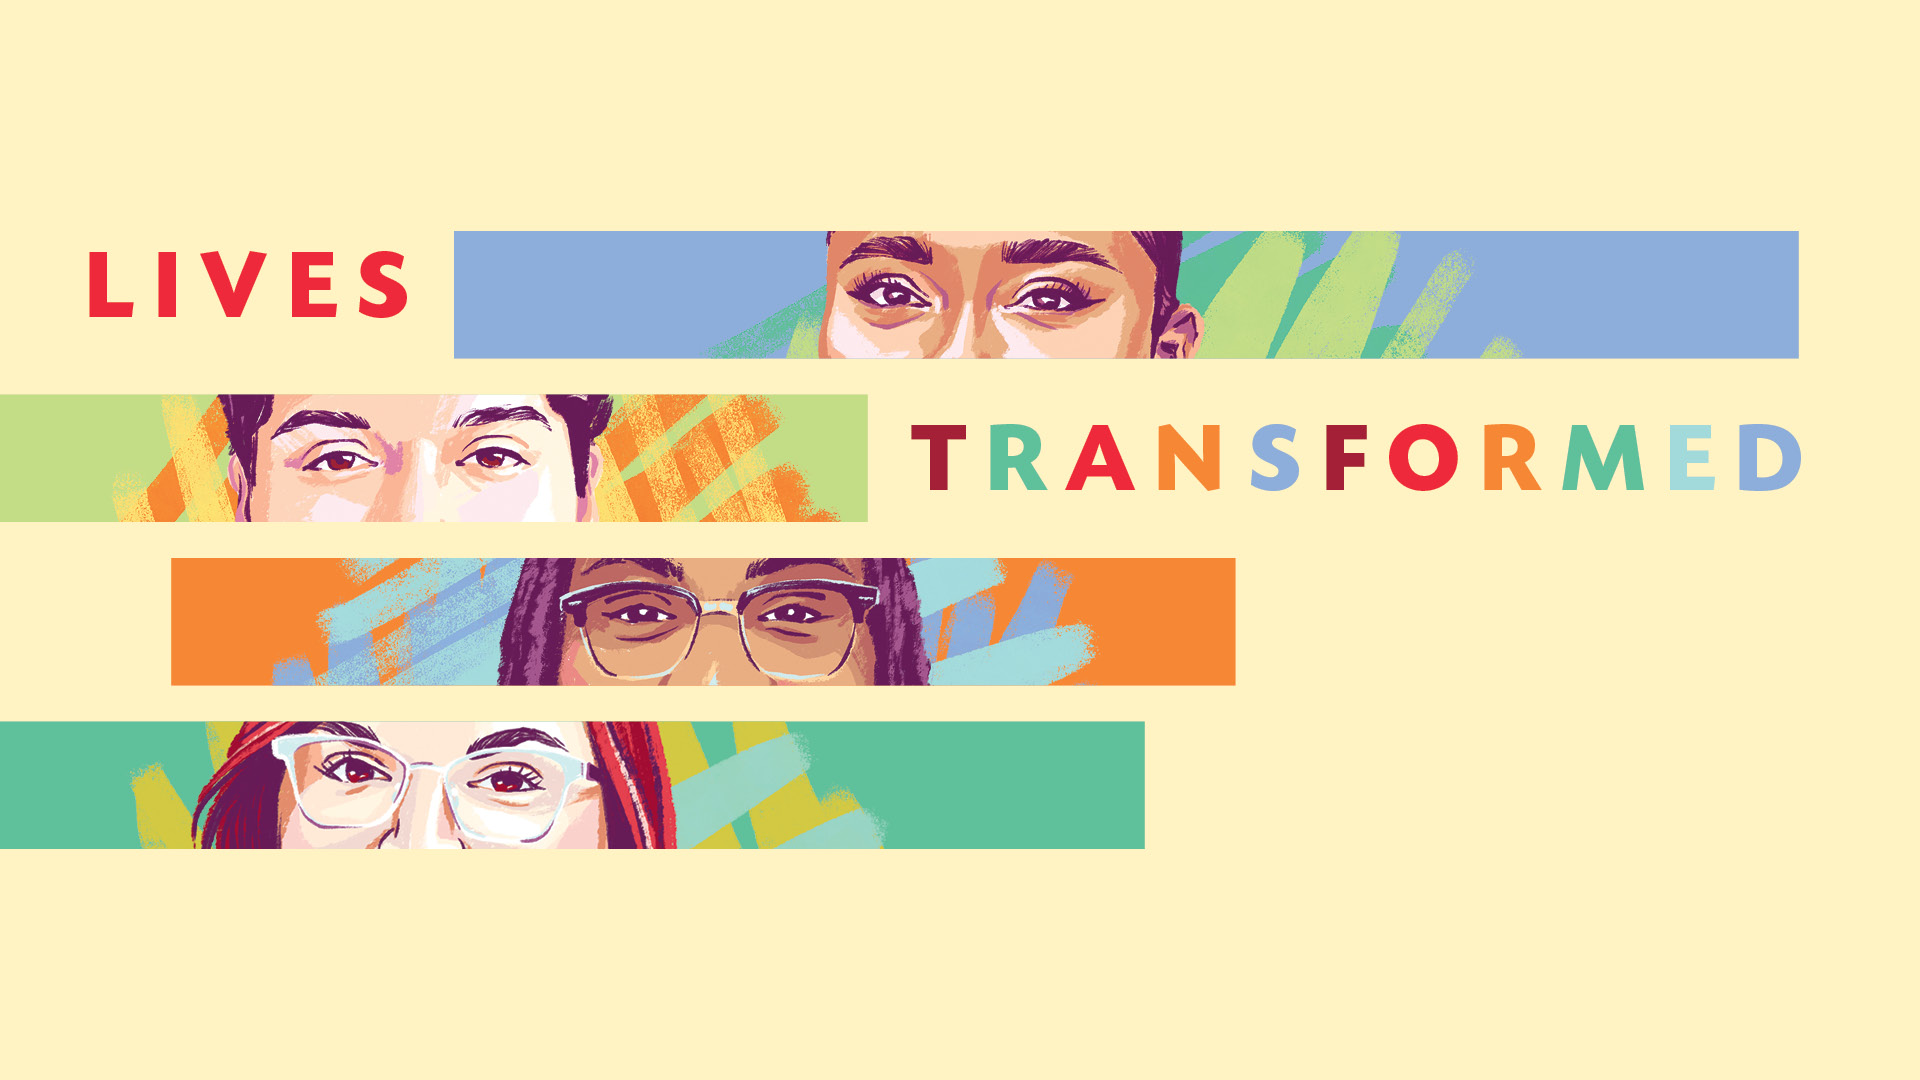 Lives transformed graphic